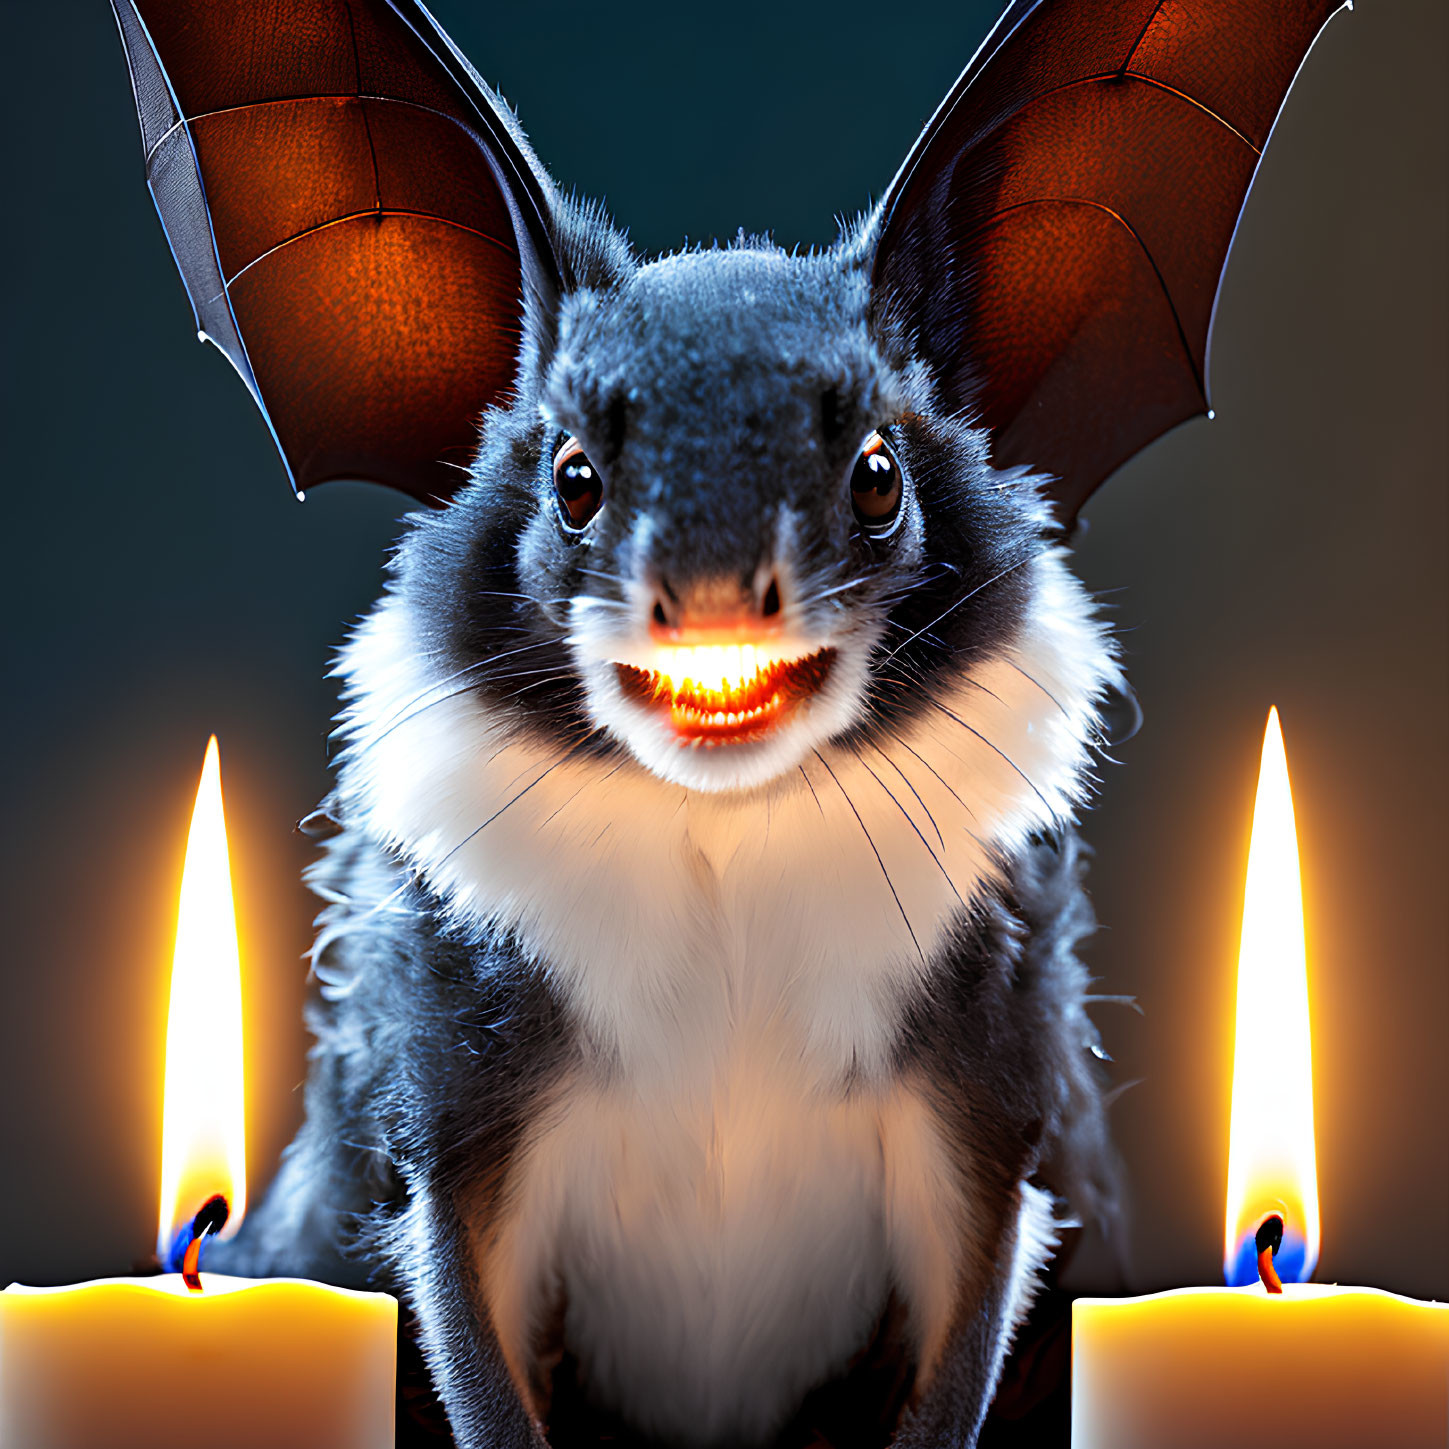 Whimsical digital artwork: Bat with human-like features and glowing candles